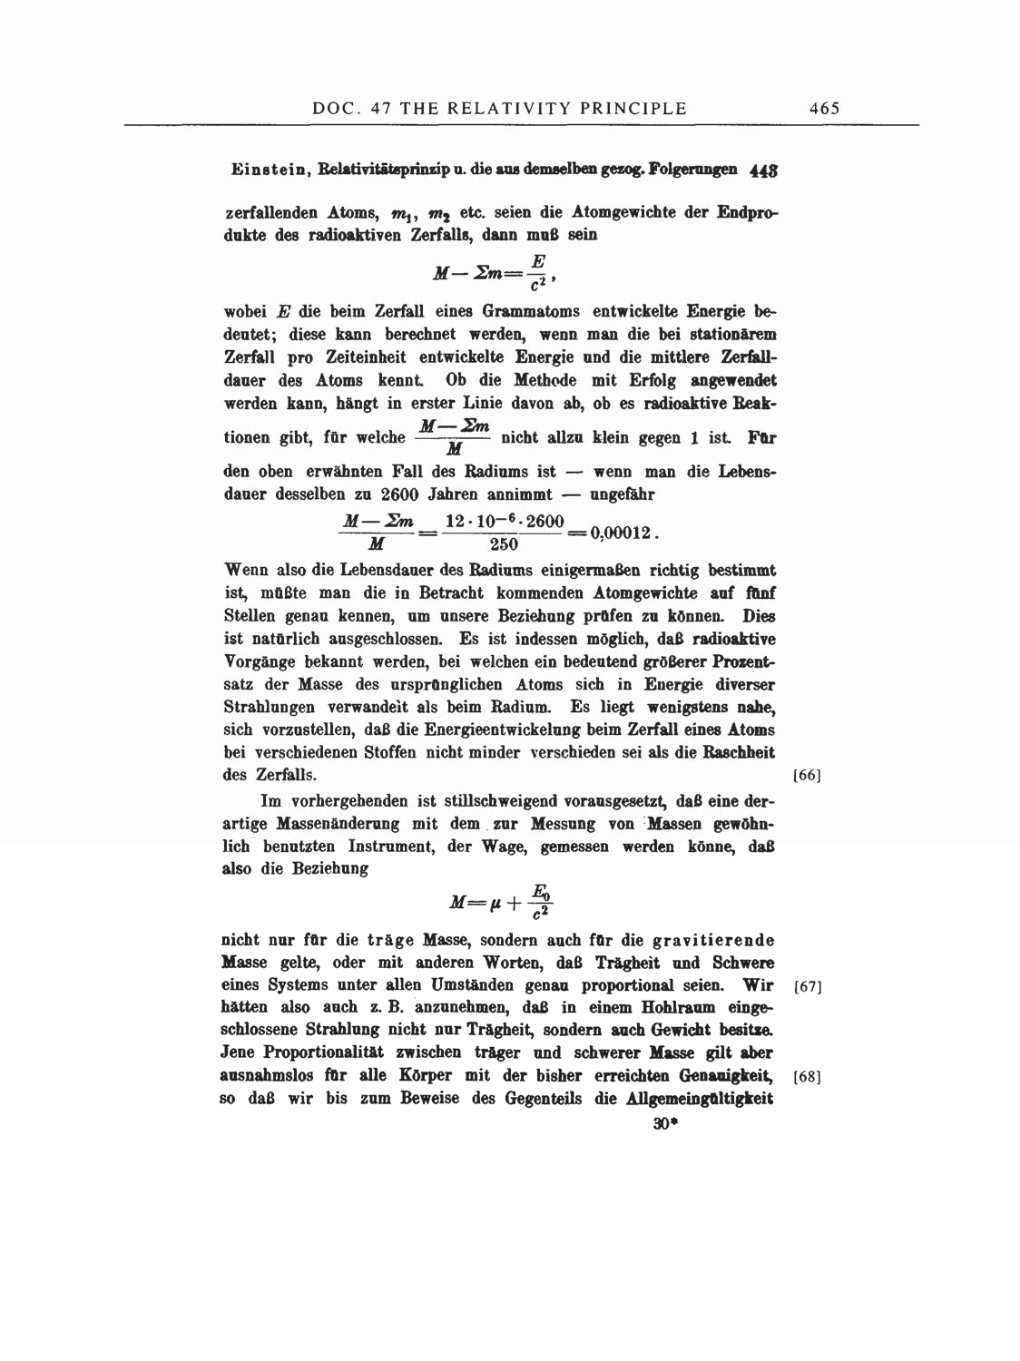 Volume 2: The Swiss Years: Writings, 1900-1909 page 465